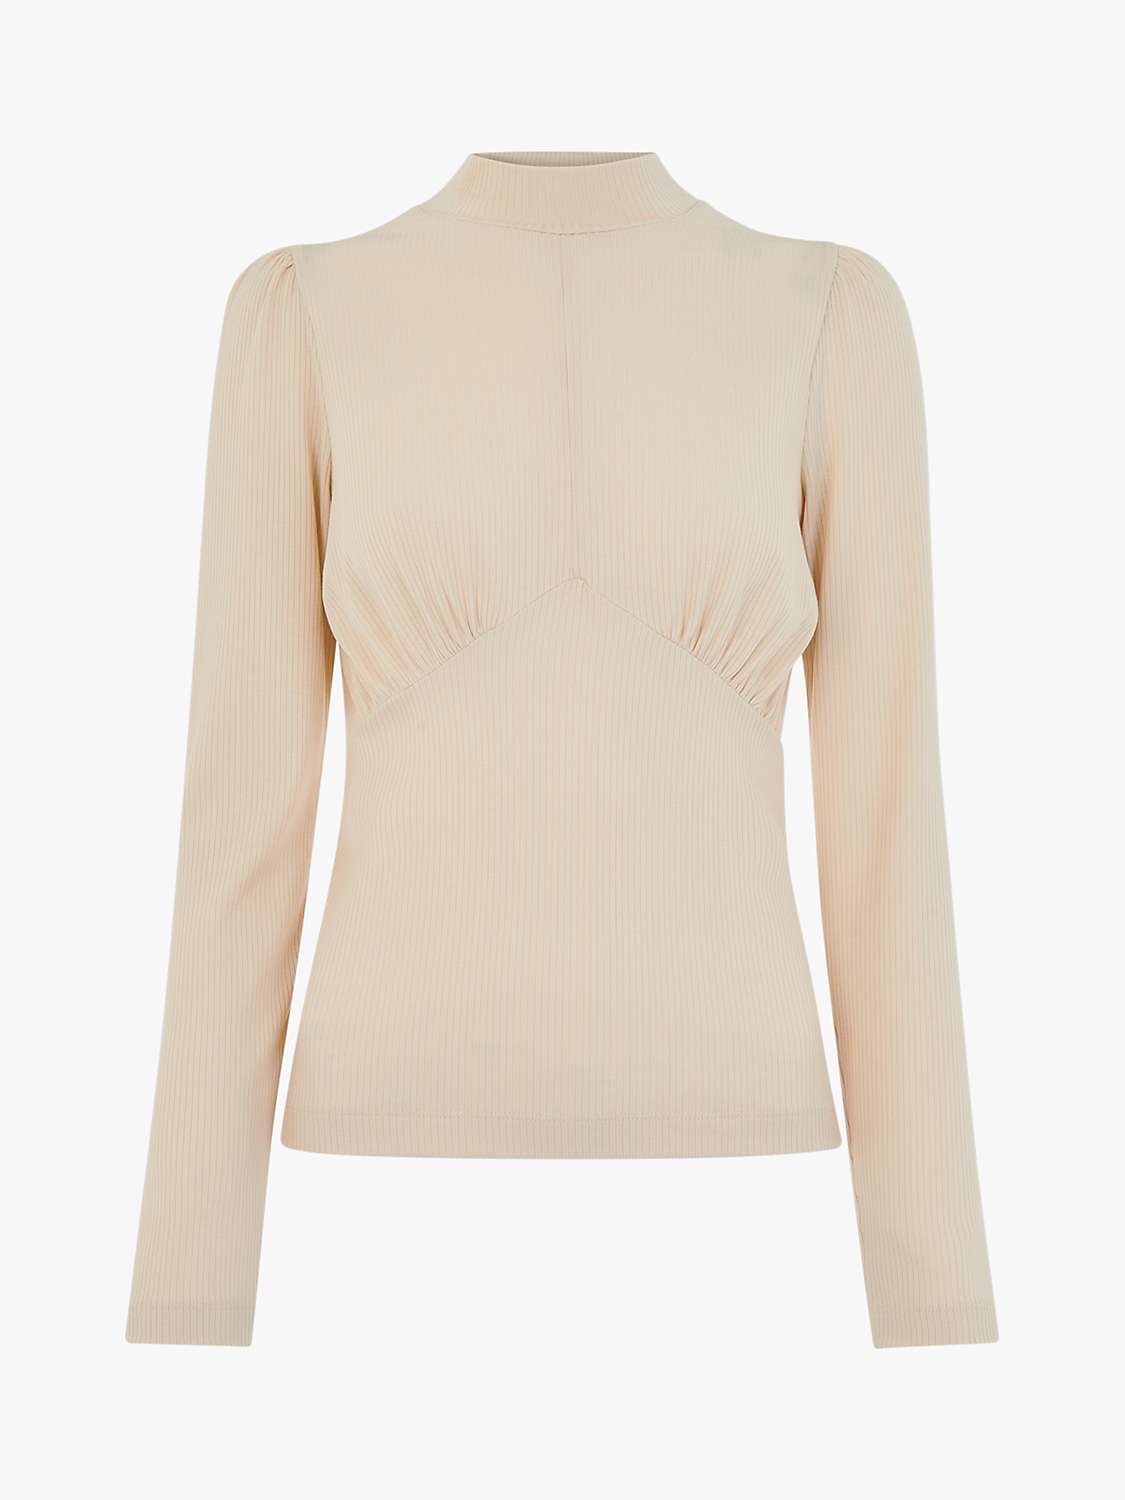 Buy Whistles Gathered Empire Line Top Online at johnlewis.com